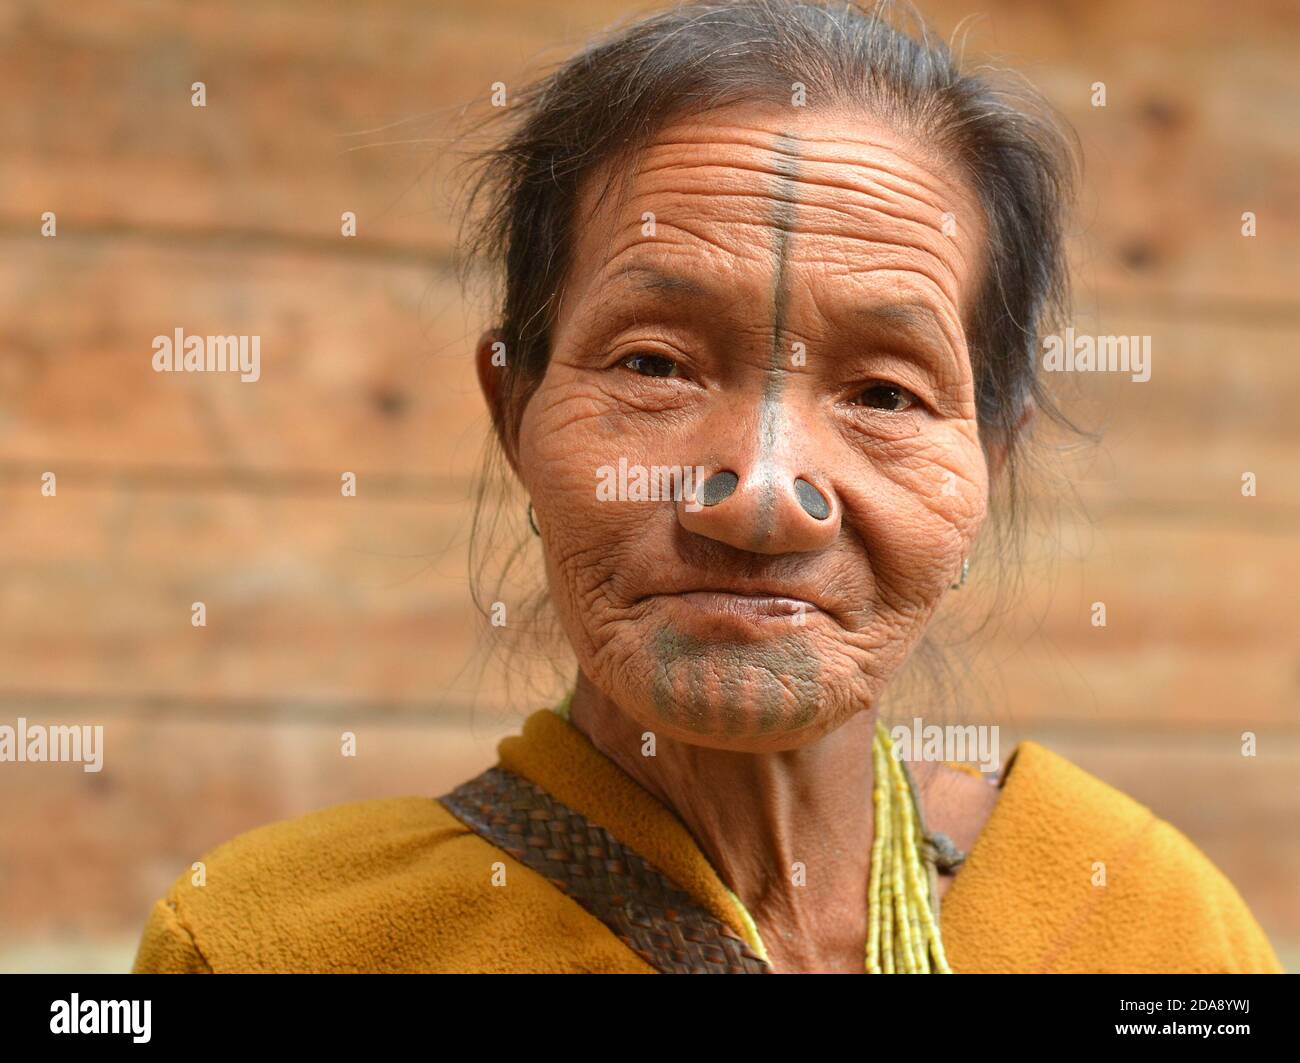 Old Northeast Indian Apatani ethnic minority tribal woman with black wooden nose plugs and traditional face tattoos poses for the camera. Stock Photo